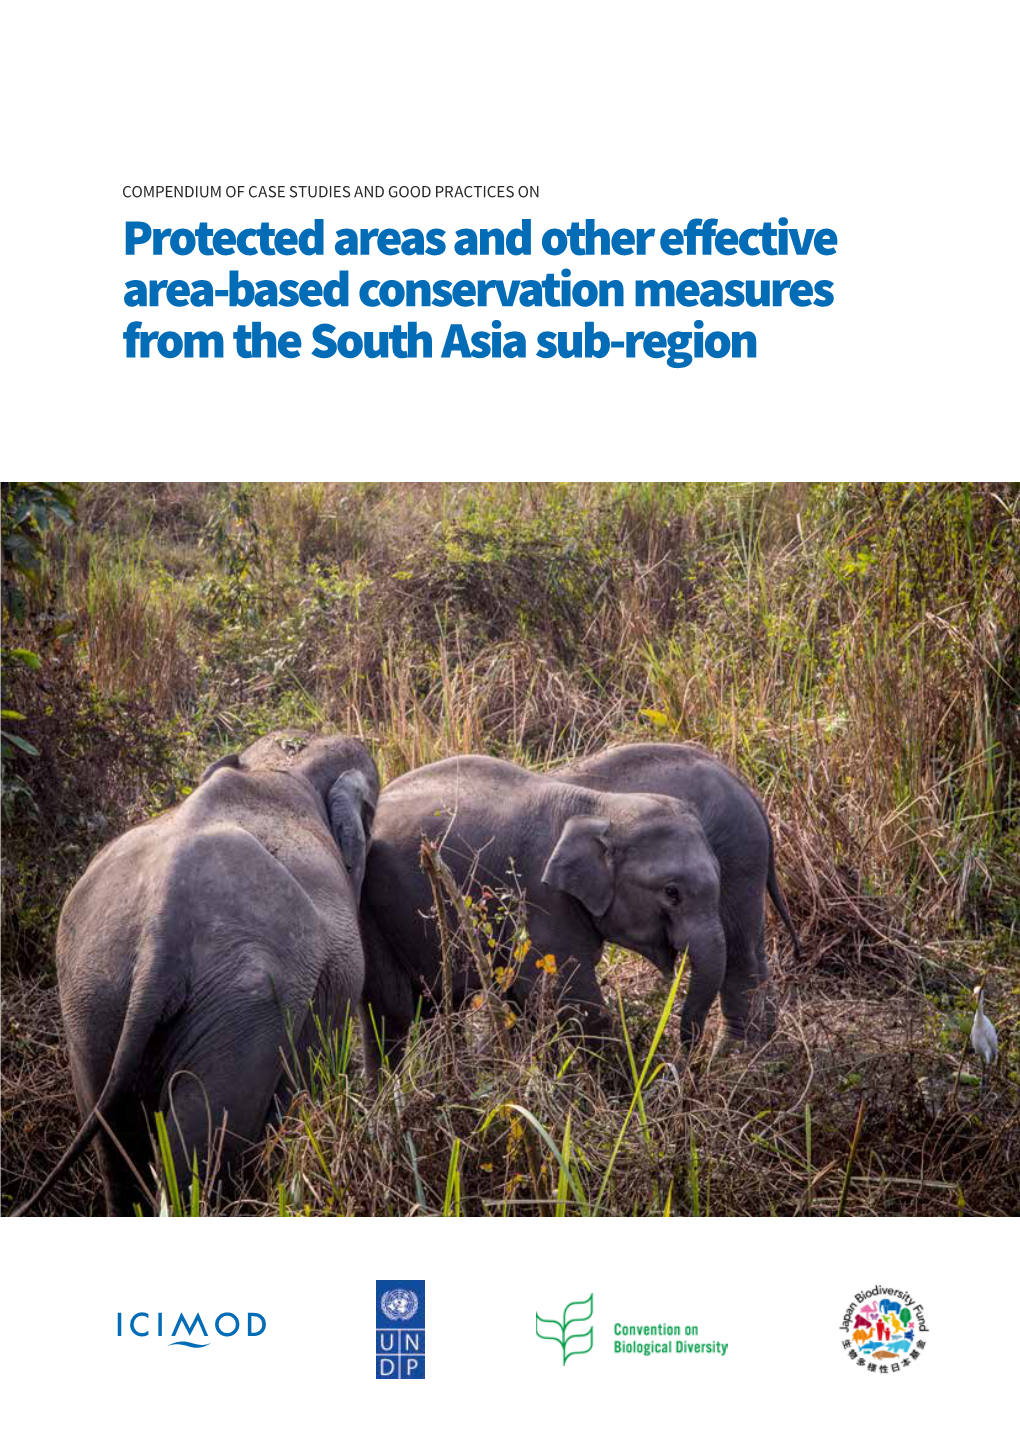 Protected Areas and Other Effective Area-Based Conservation Measures from the South Asia Sub-Region